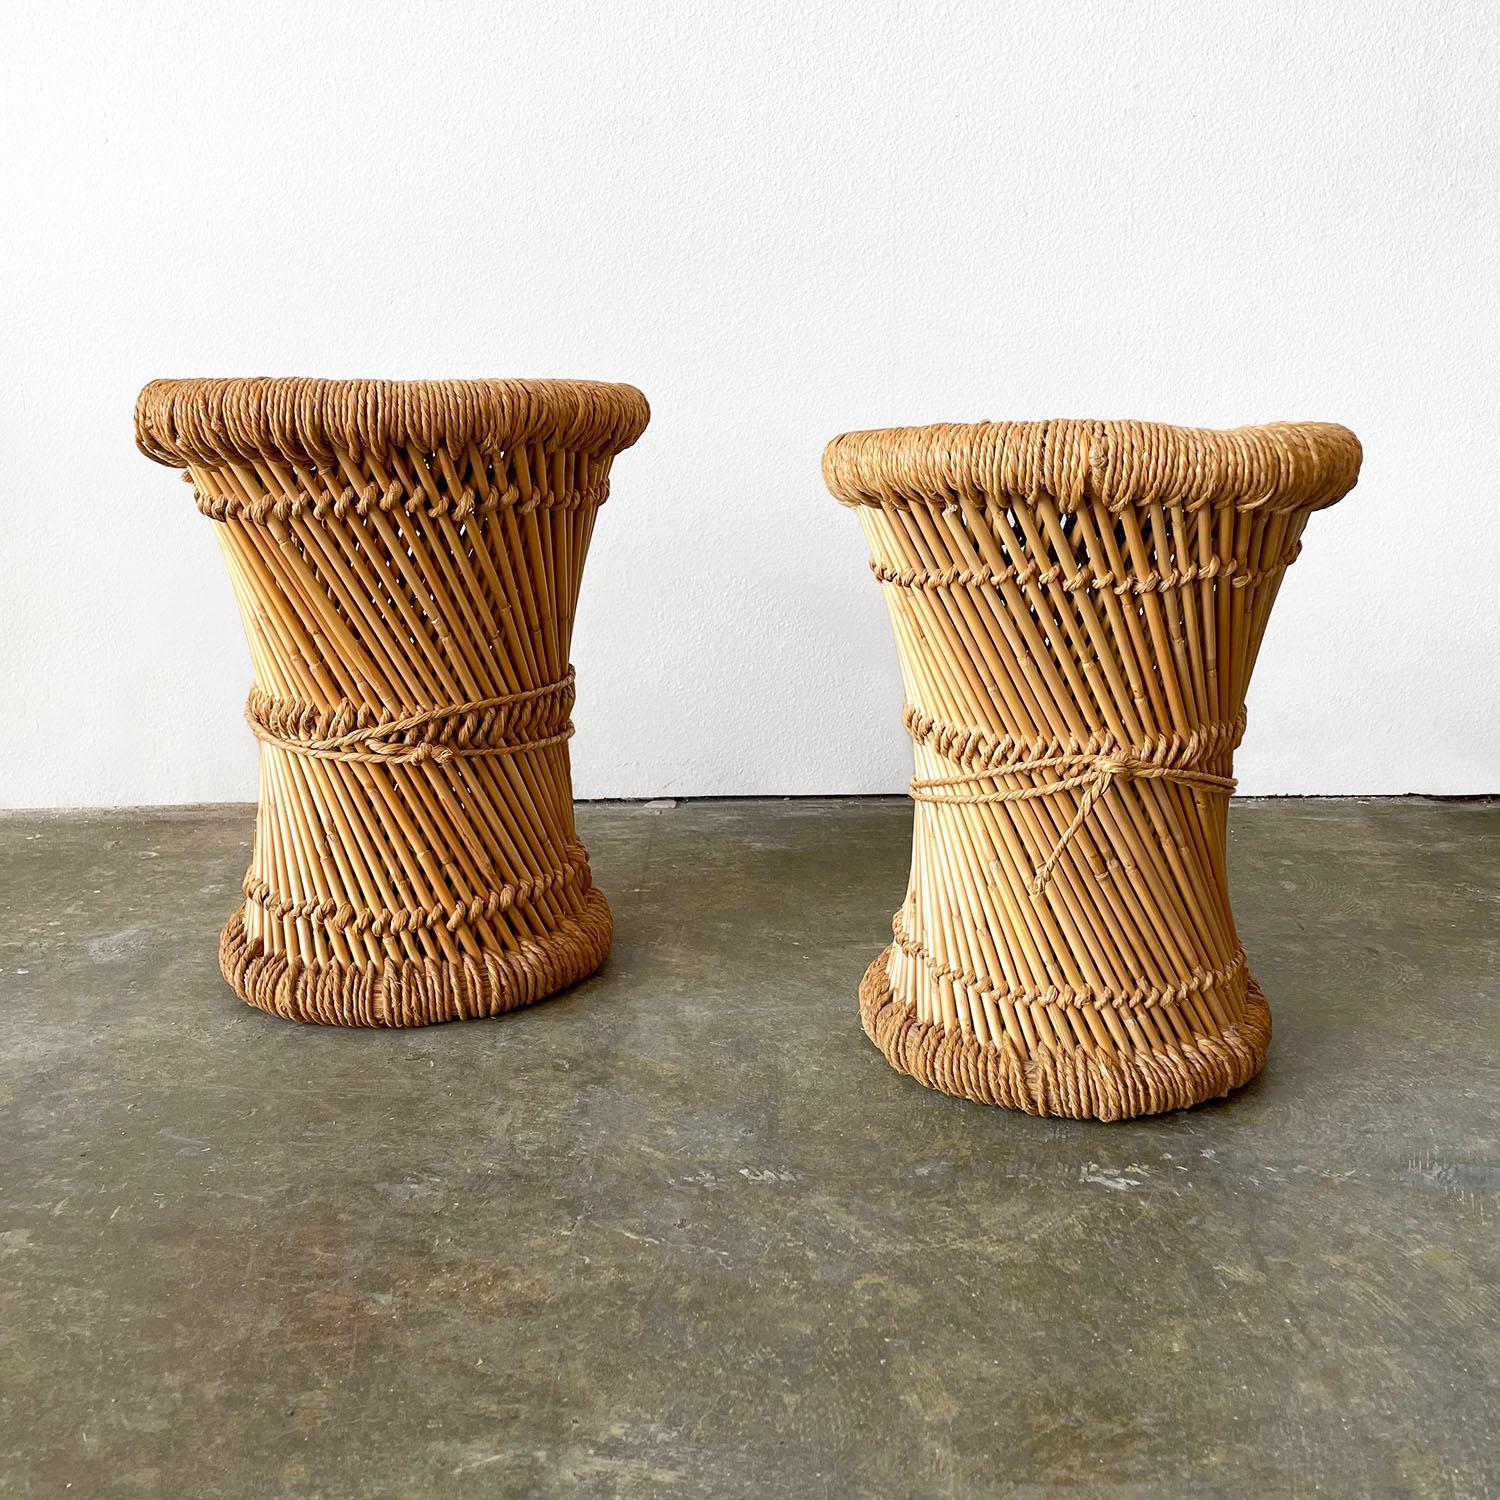 Pair of French primitive woven stools
France, circa 1970’s
Natural color variations between the two stools
Handcrafted with a mix of organic materials
Intricately woven reeds and jute, wonderful details throughout
Patina from age and use
Sold